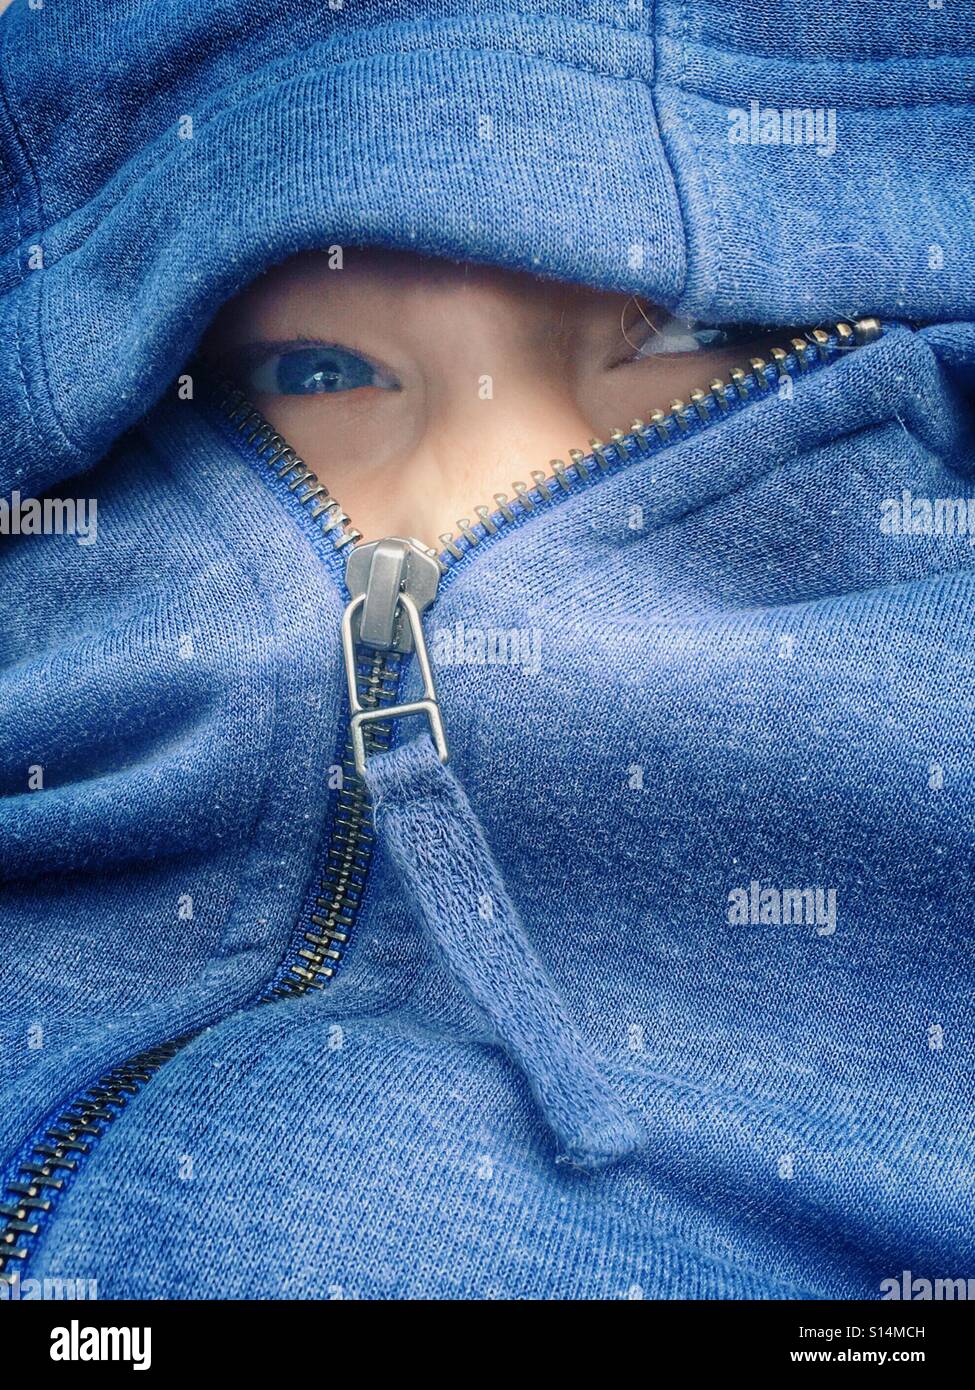 Young girl with blue eyes peering out from zipped up hoody Stock Photo